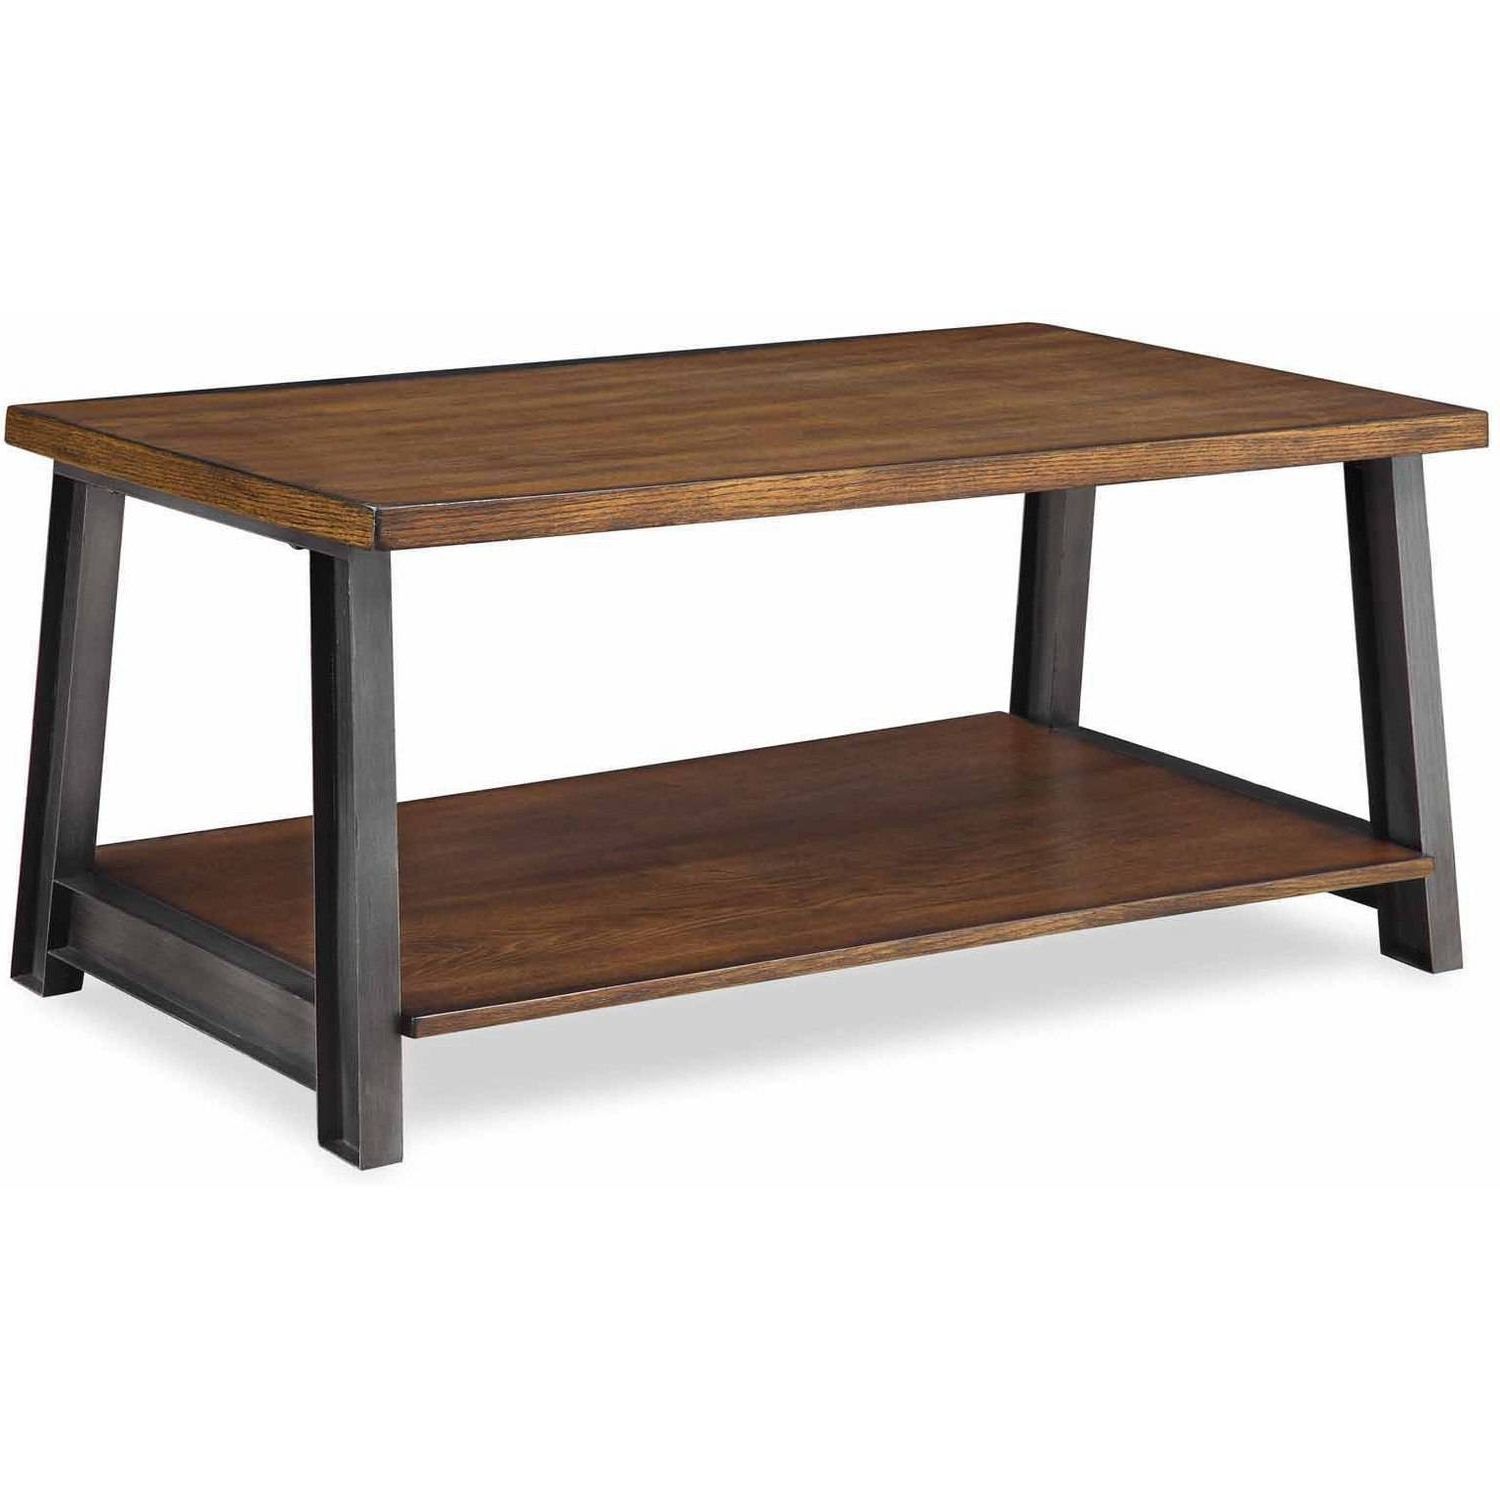 Current Shelter Cocktail Tables With Regard To Better Homes And Gardens Mercer Coffee Table, Vintage Oak – Walmart (Gallery 9 of 20)